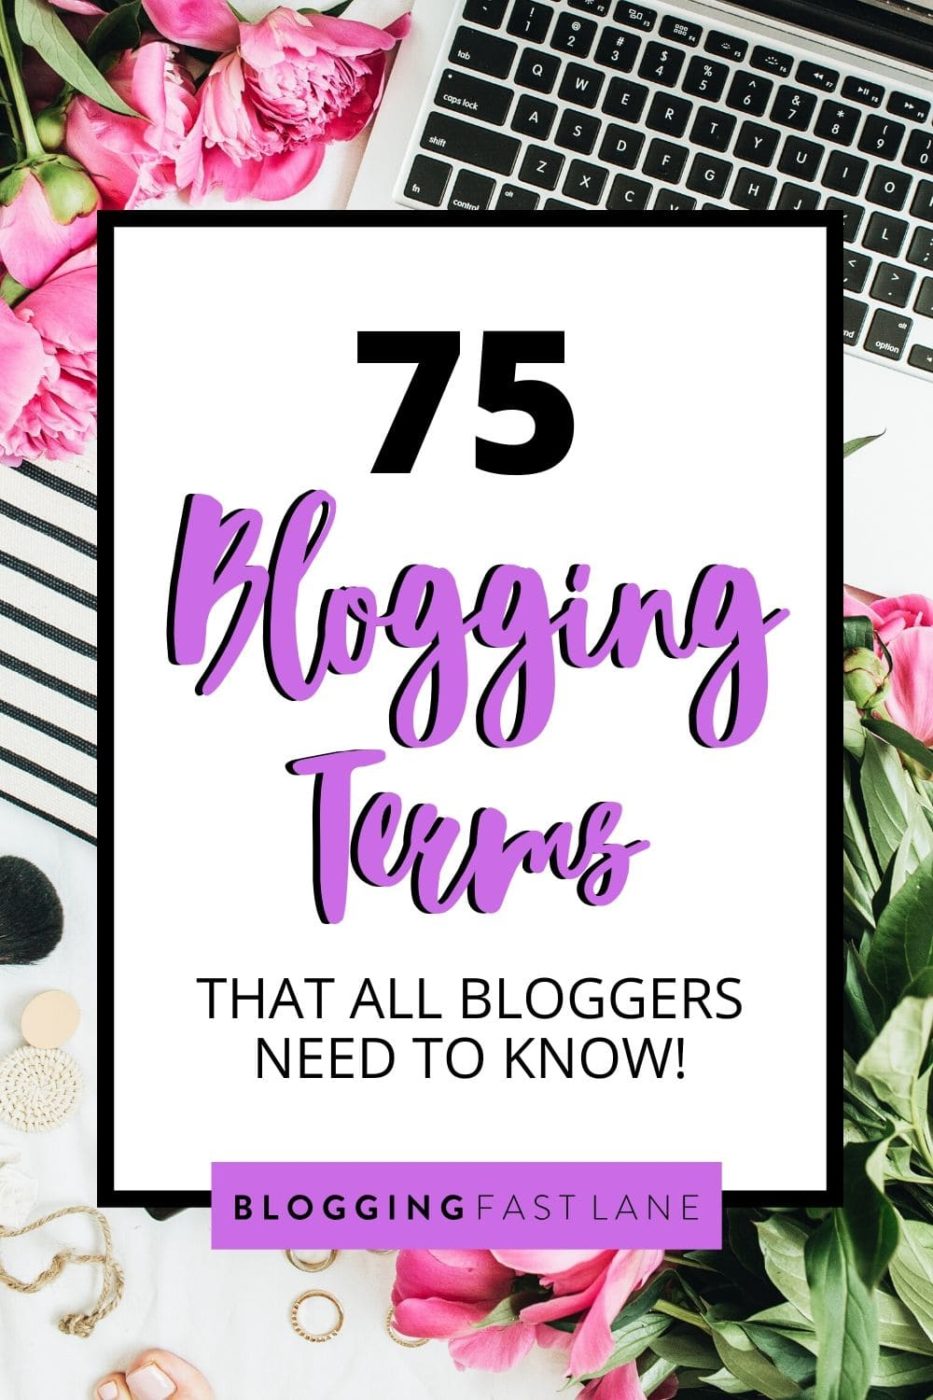 The Ultimate Guide to Blogging Terms | Looking to beef up your online vocabulary? Check out our epic list of blogging terms that all bloggers need to know!